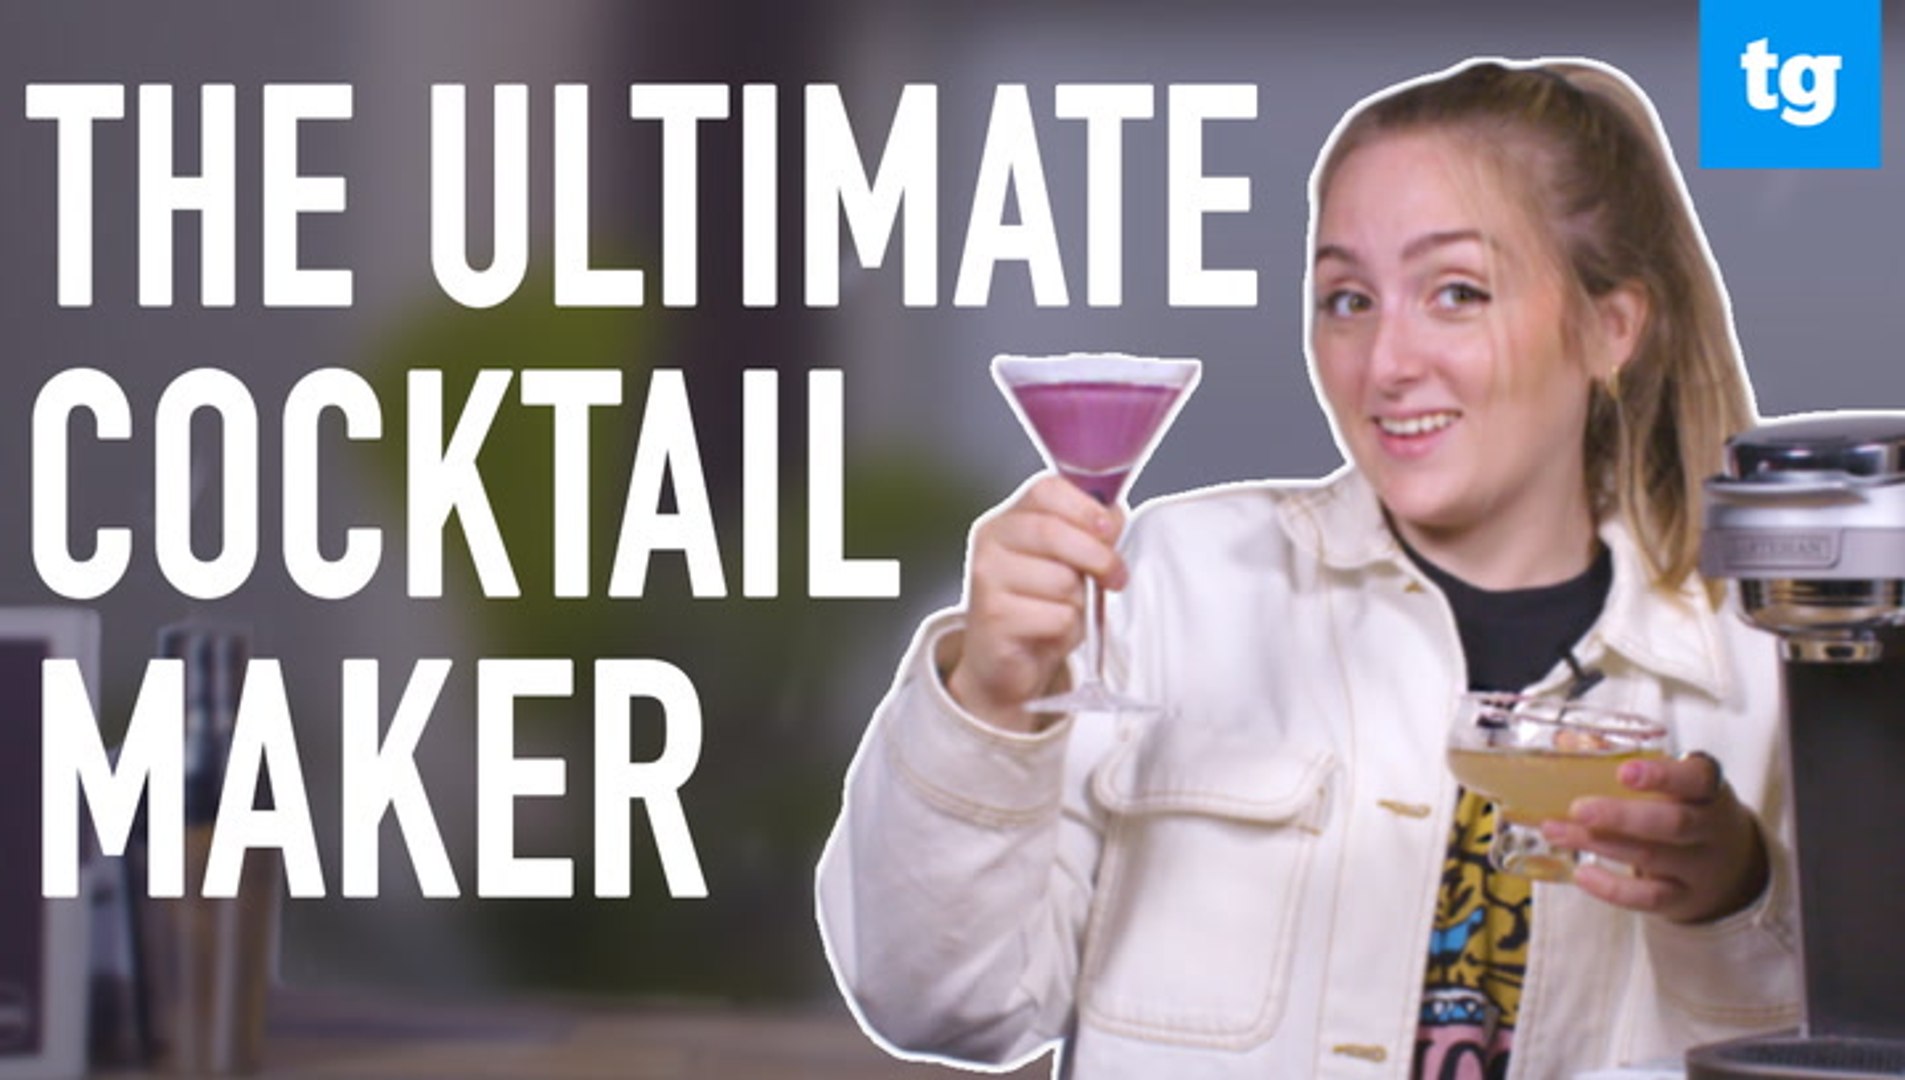 Bartesian Duet vs. Bartesian Cocktail Maker: Which Should YOU Buy